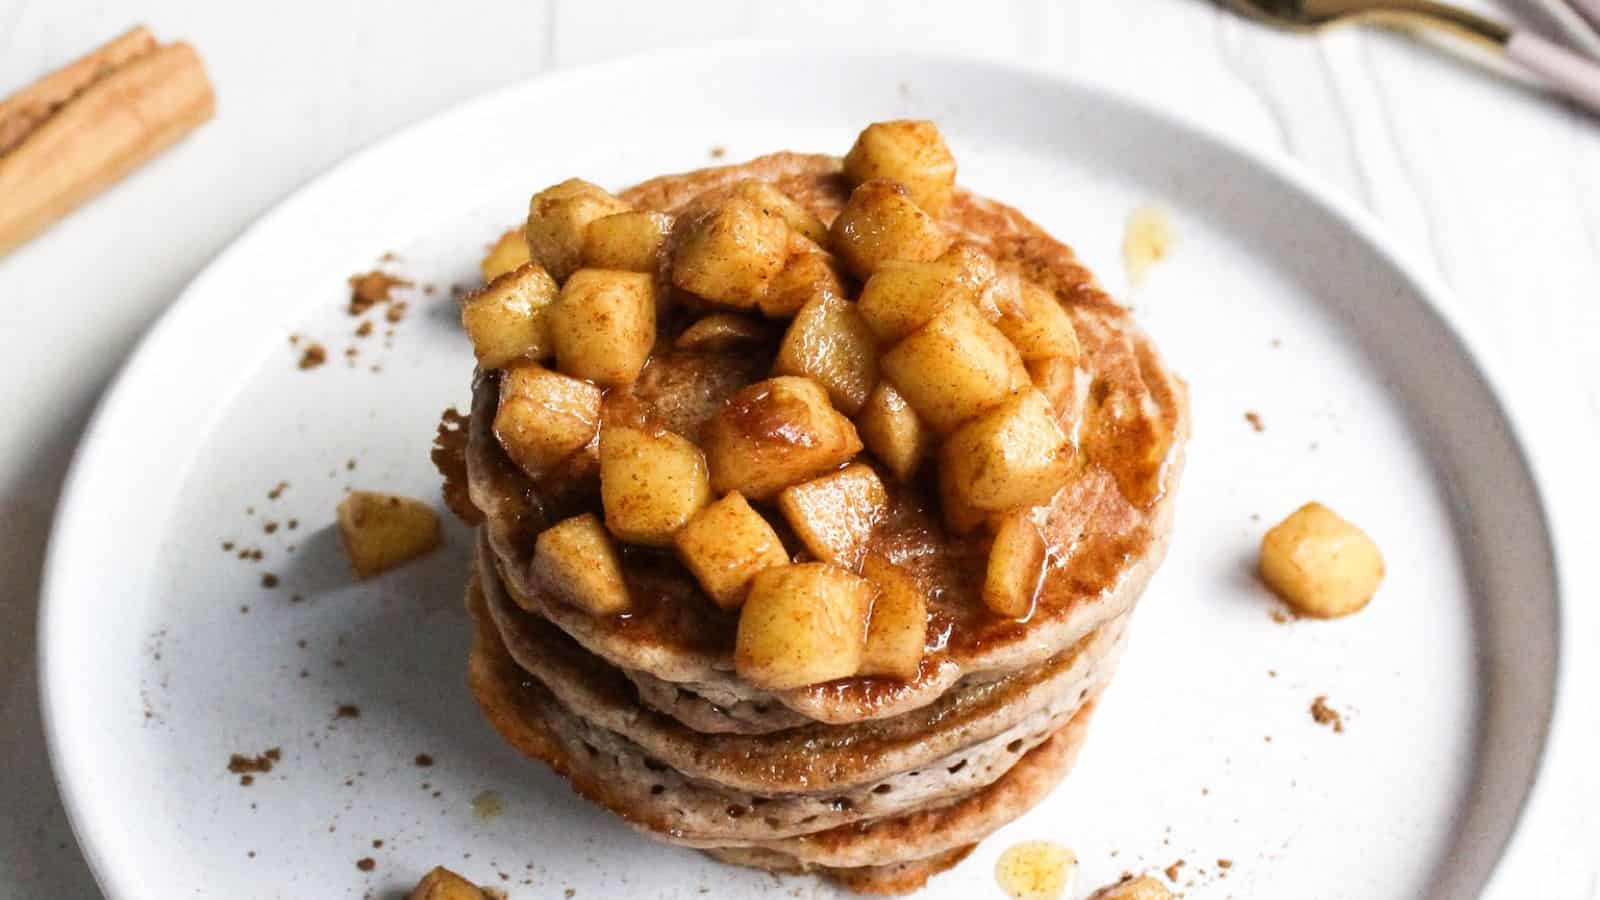 Cinnamon pancakes topped with cooked diced apples.